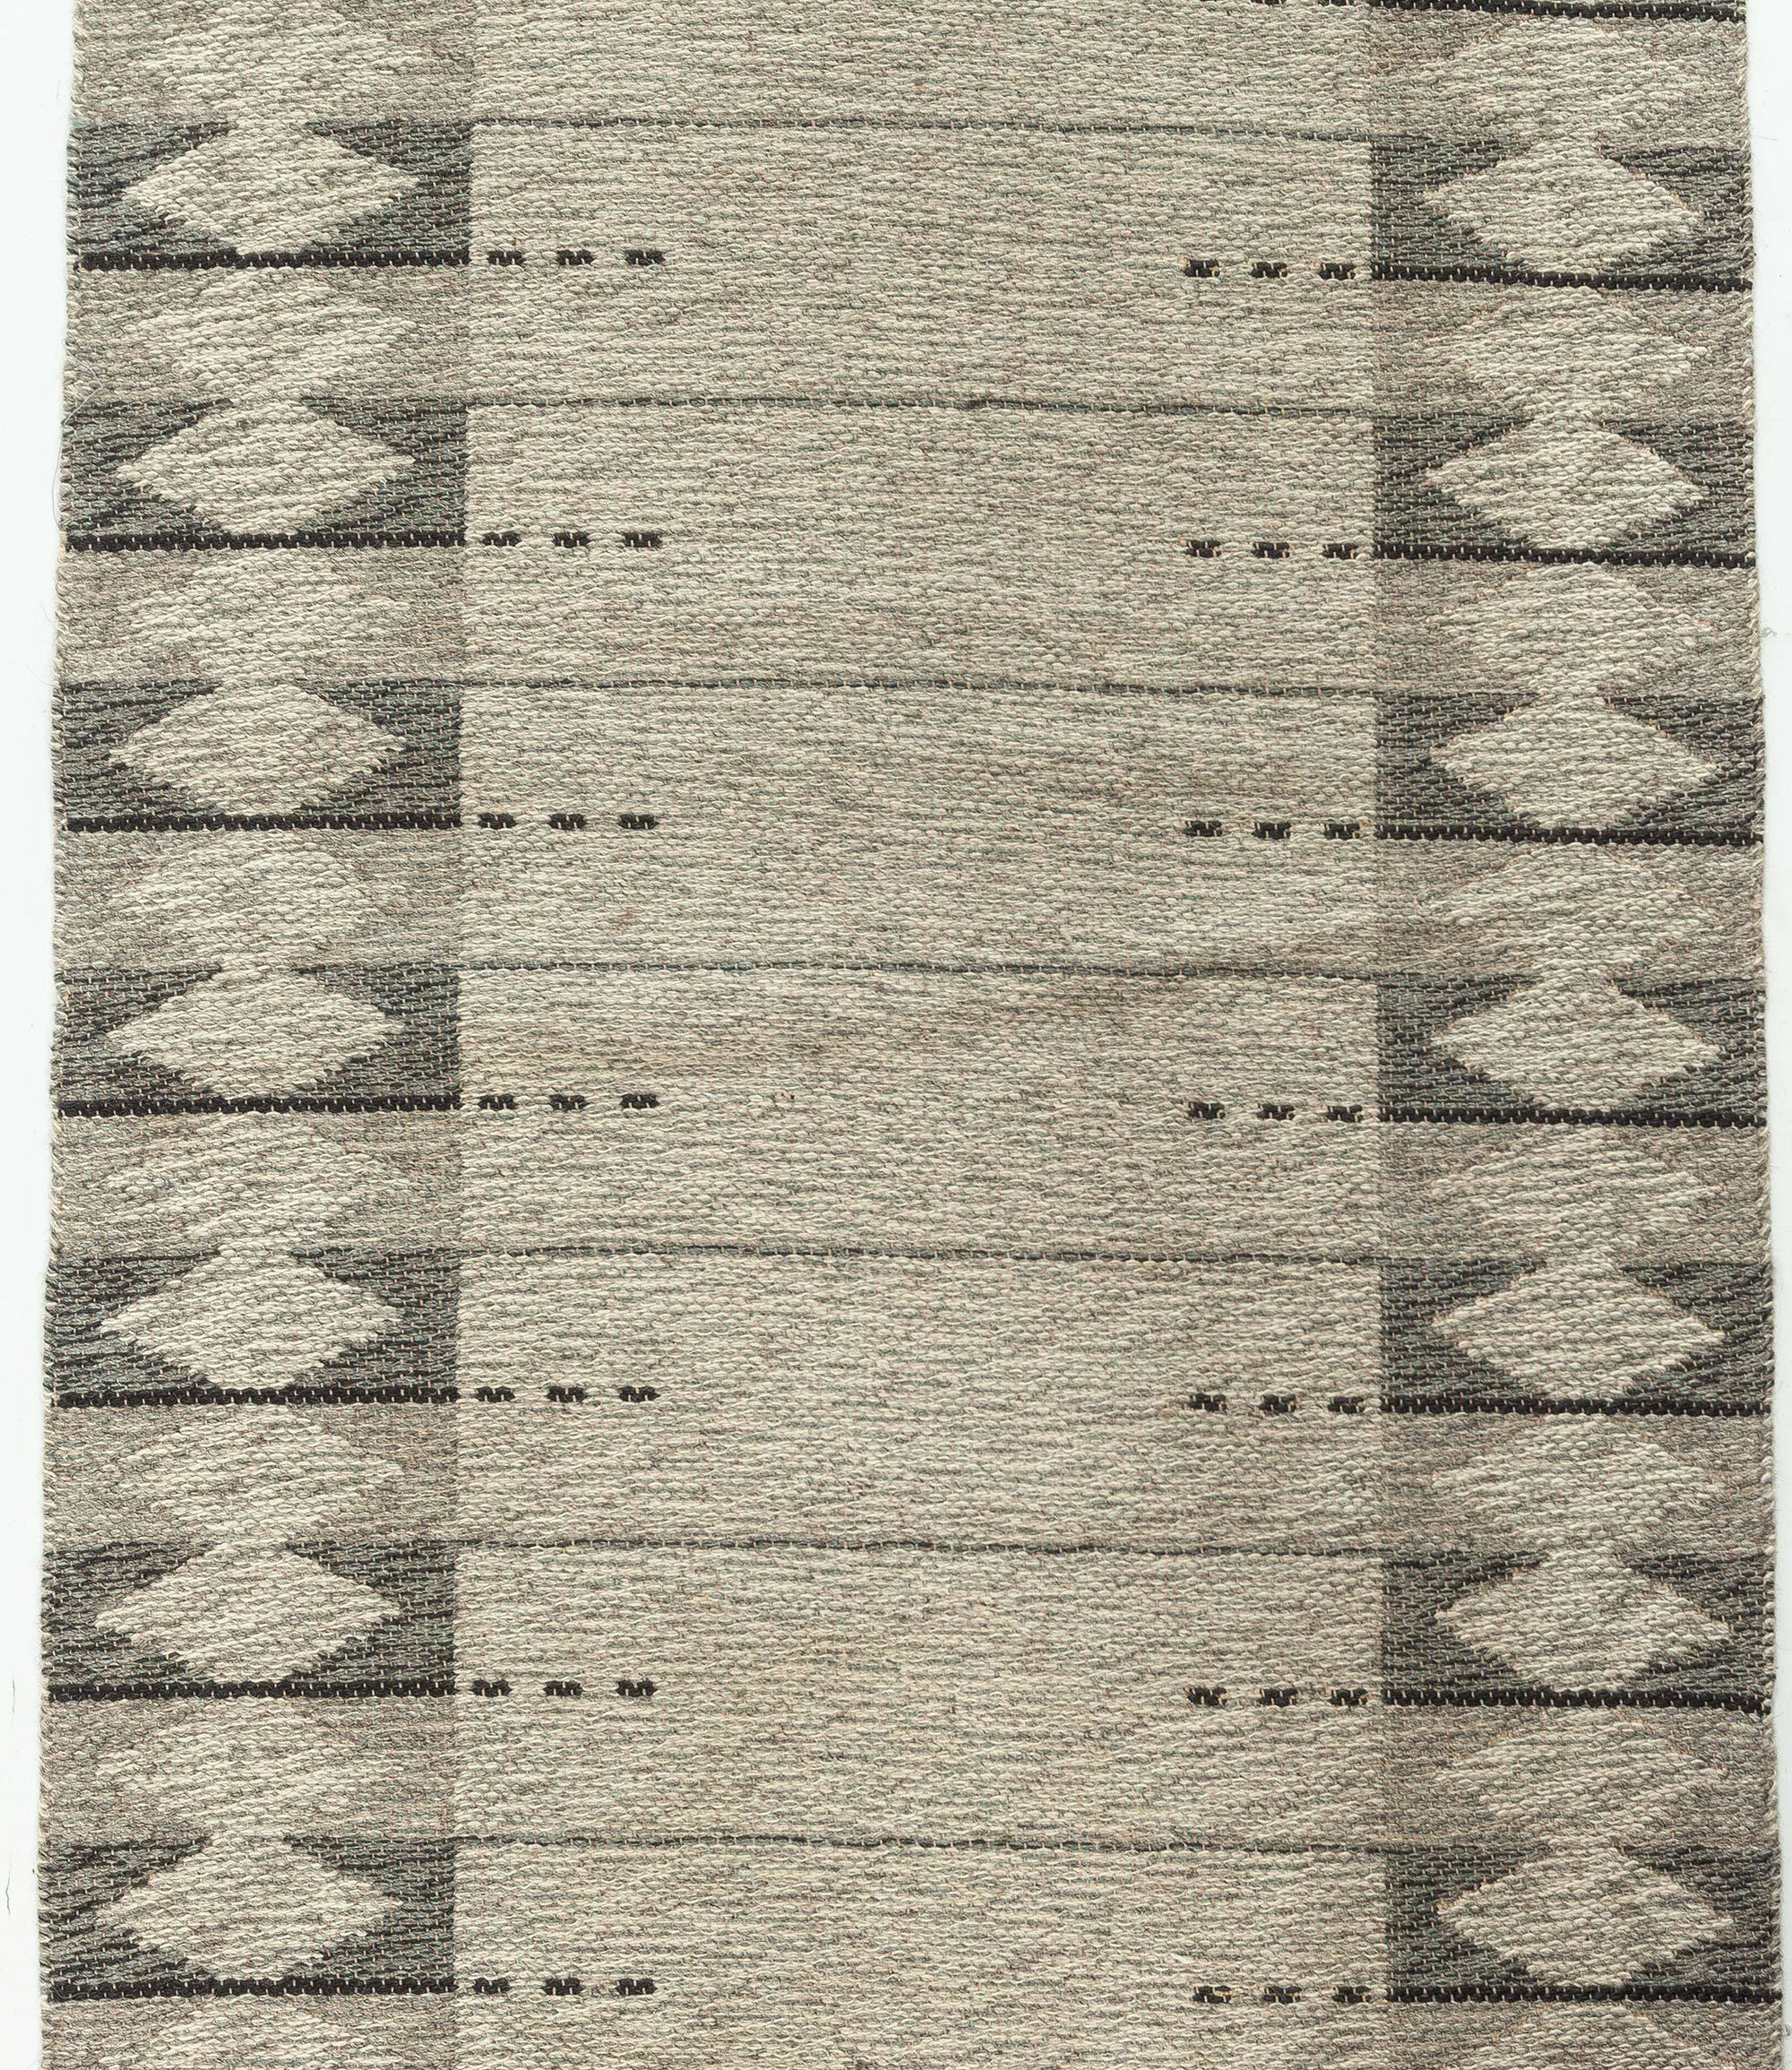 Hand-Woven Vintage Swedish Double Sided Runner For Sale